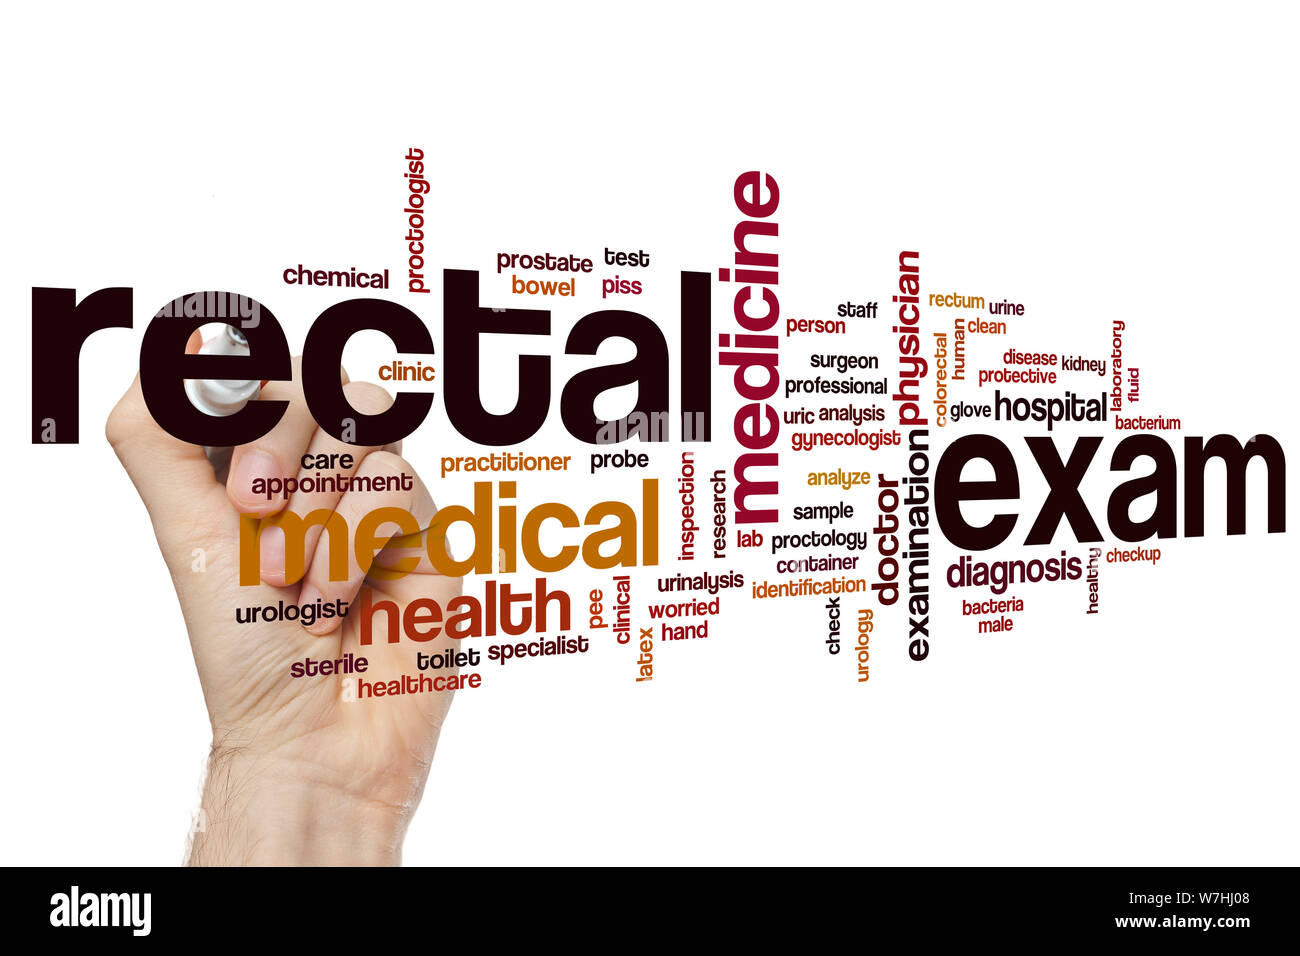 Rectal exam word cloud concept Stock Photo